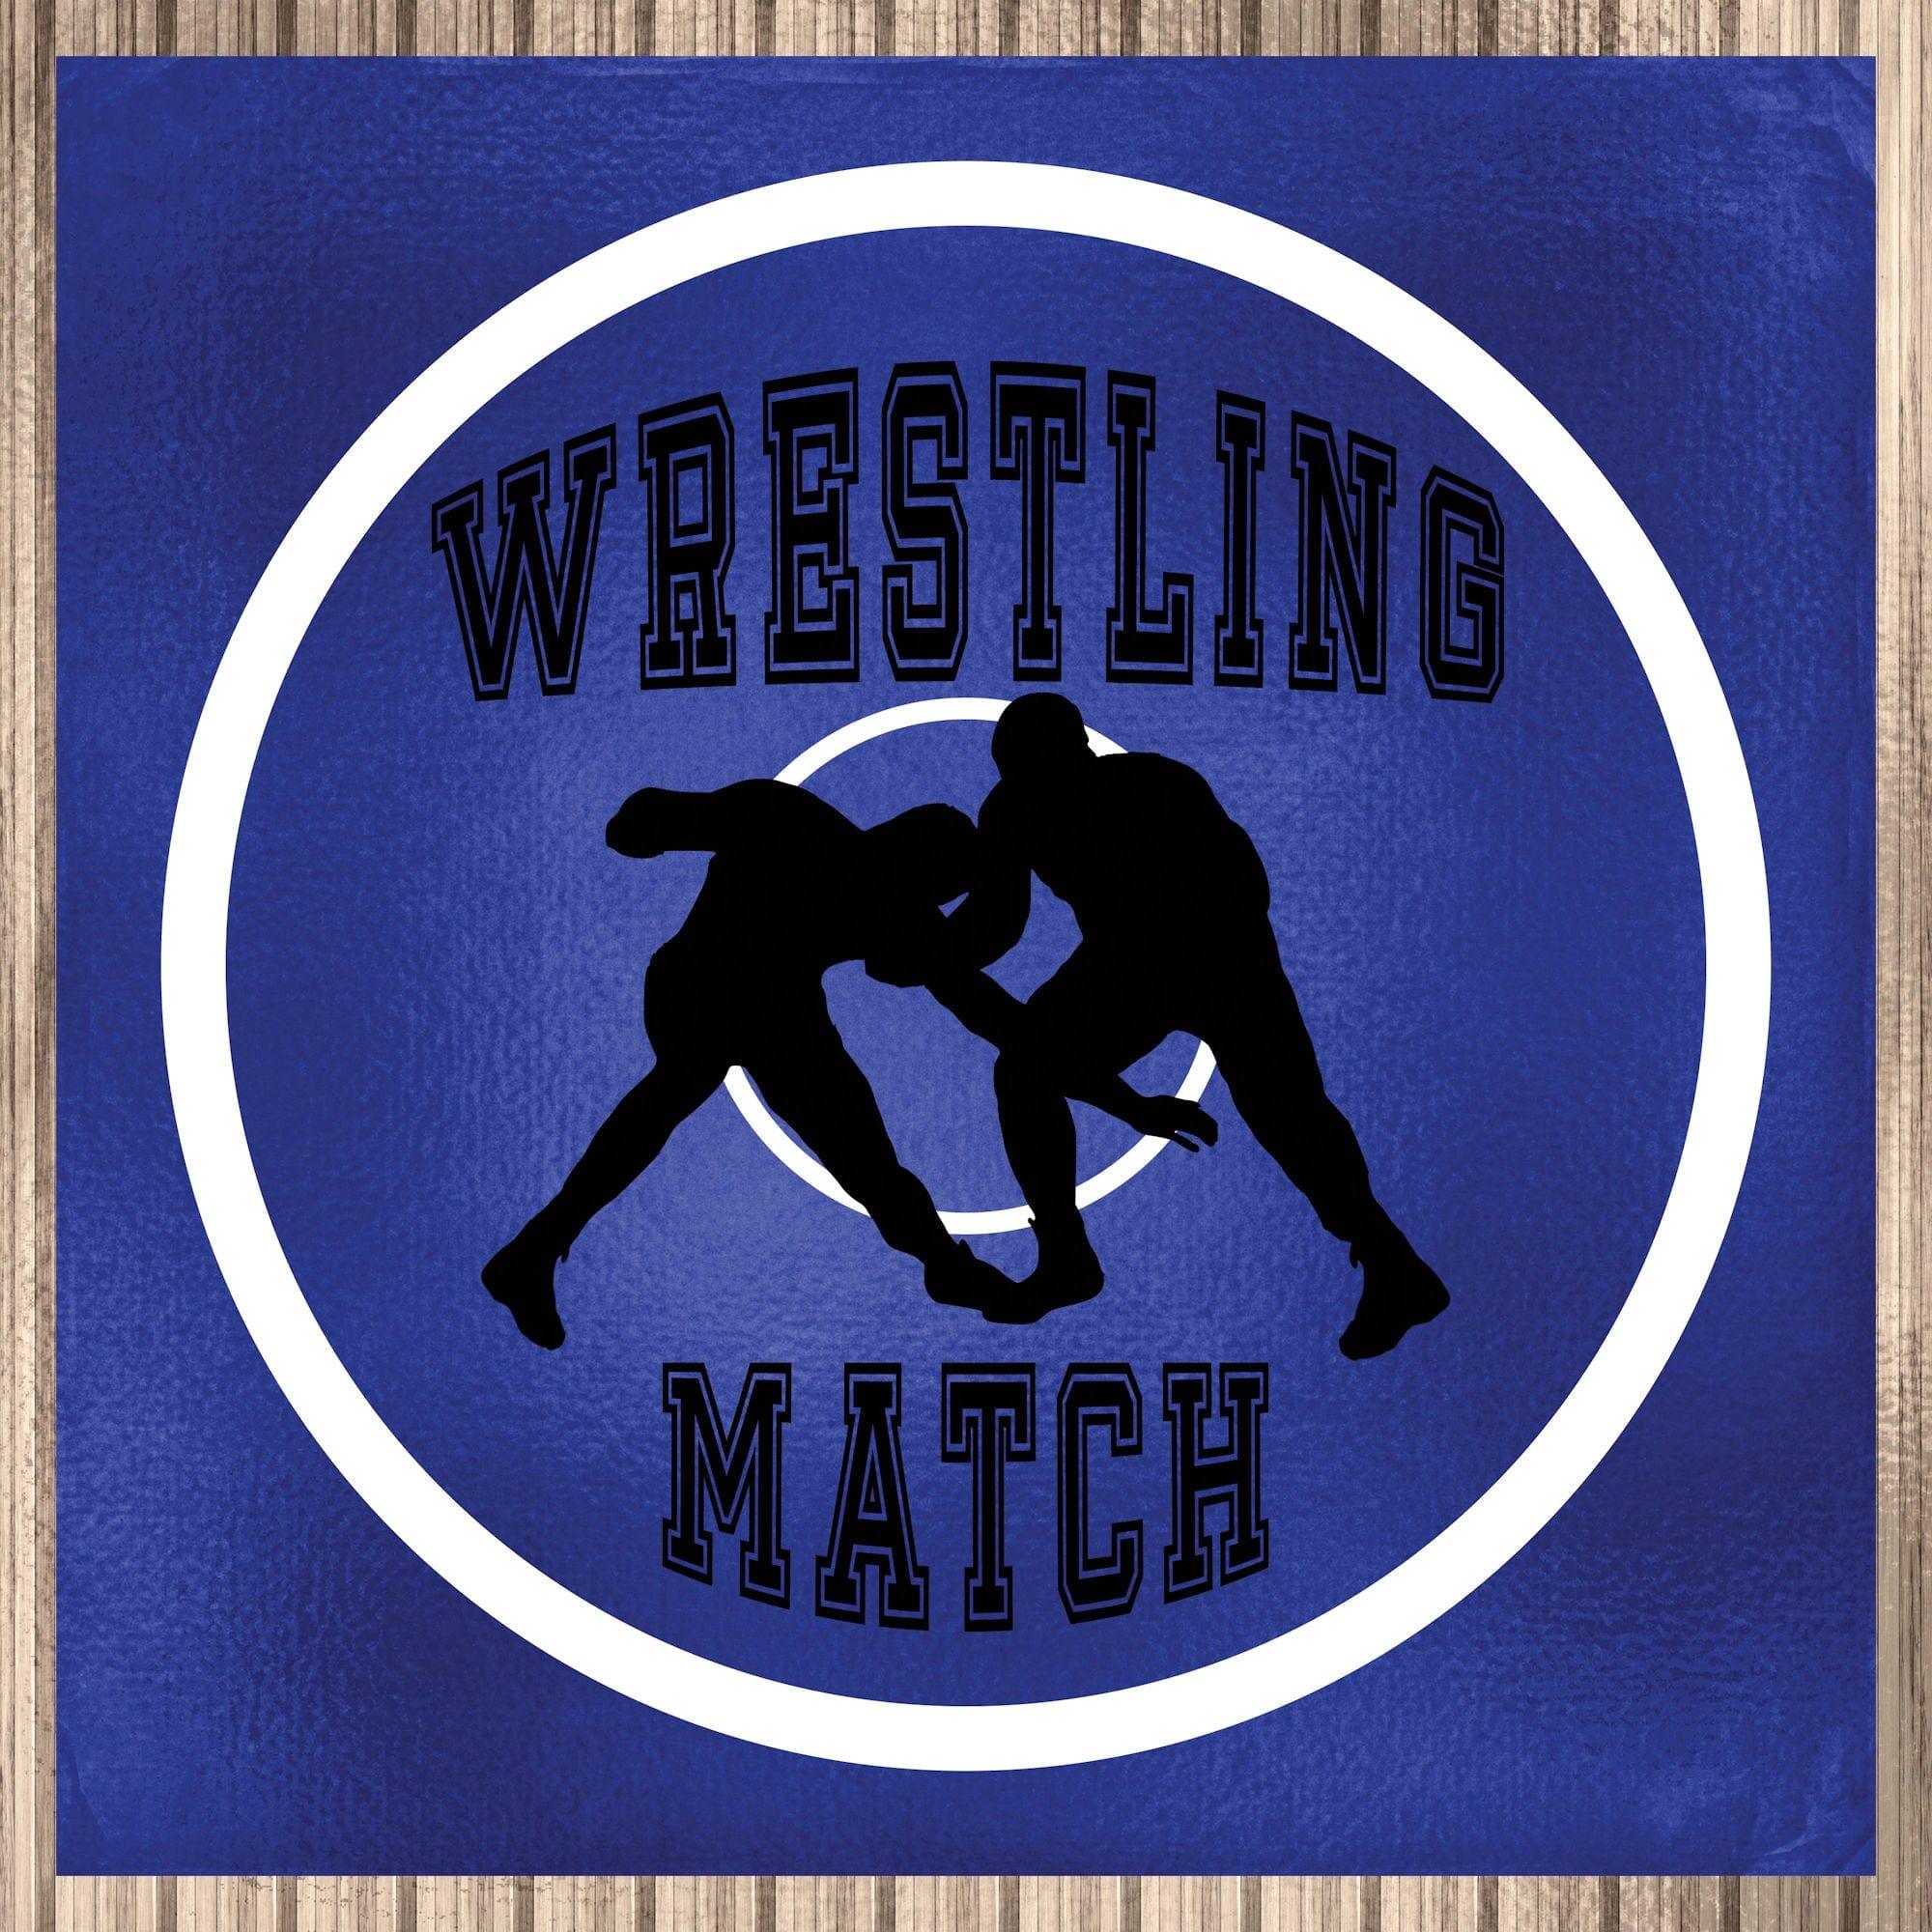 Male Wrestling Collection Wrestling Match 12 x 12 Double-Sided Scrapbook Paper by SSC Designs - Scrapbook Supply Companies